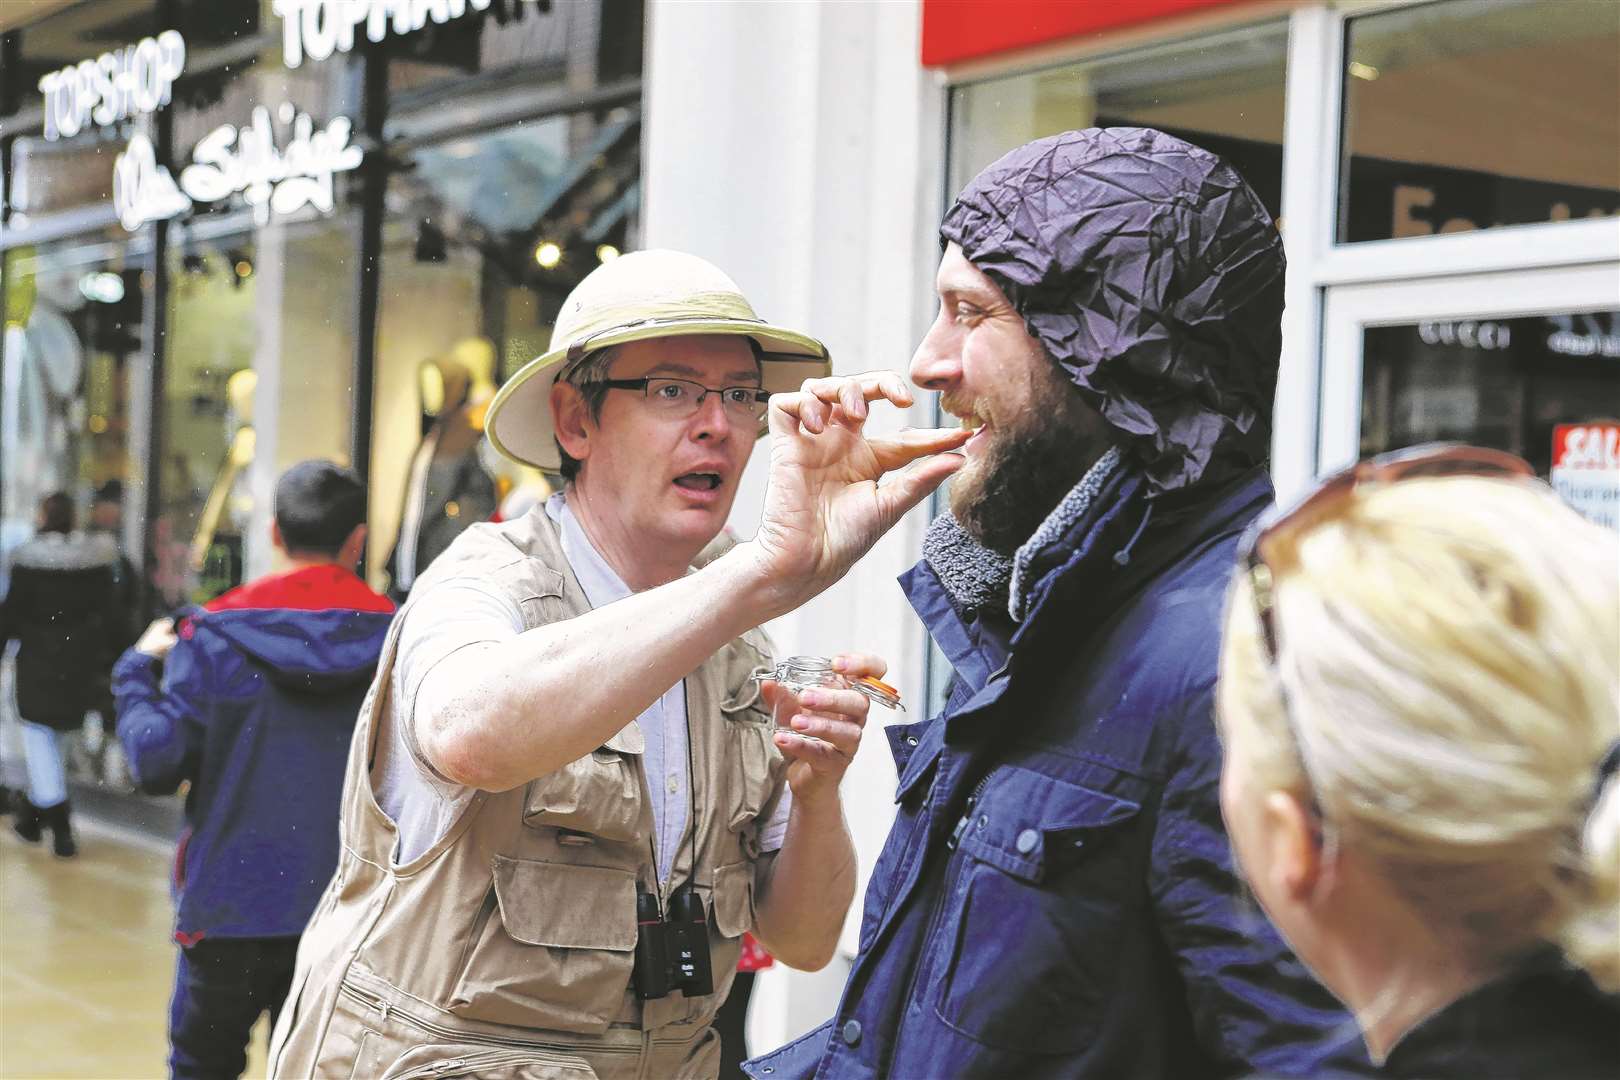 An eccentric explorer inspects a shopper as part of Looping the Loop festival